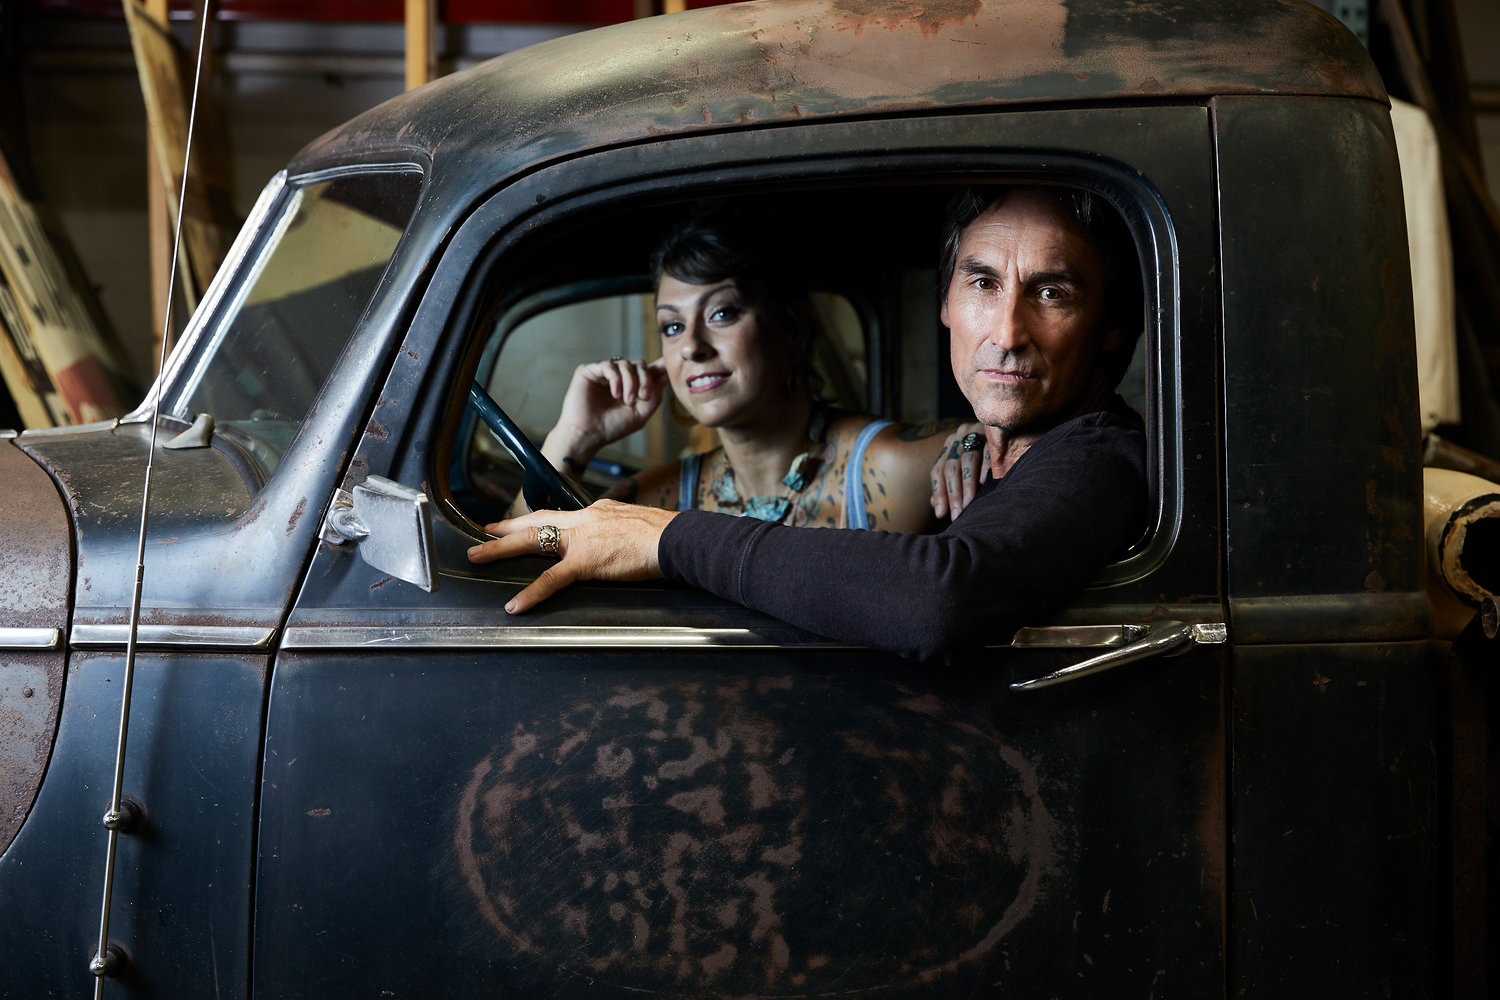 Mike Wolfe and Danielle Colby of “American Pickers”